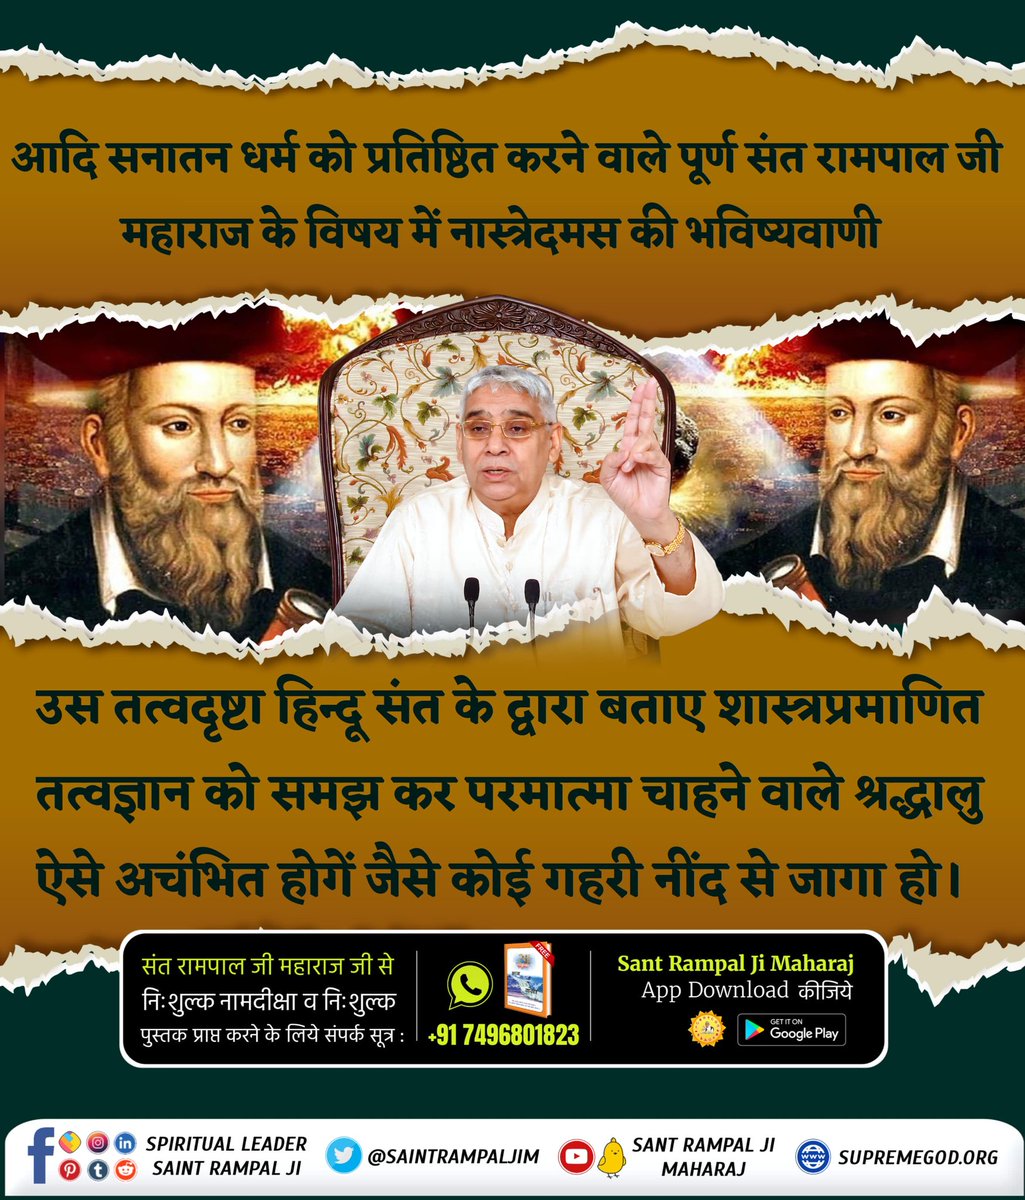 #आदि_सनातनधर्म_होगाप्रतिष्ठित
Many foretellers have told about Saint Rampal Ji Maharaj that He is going to unite the whole world through His spiritual knowledge.